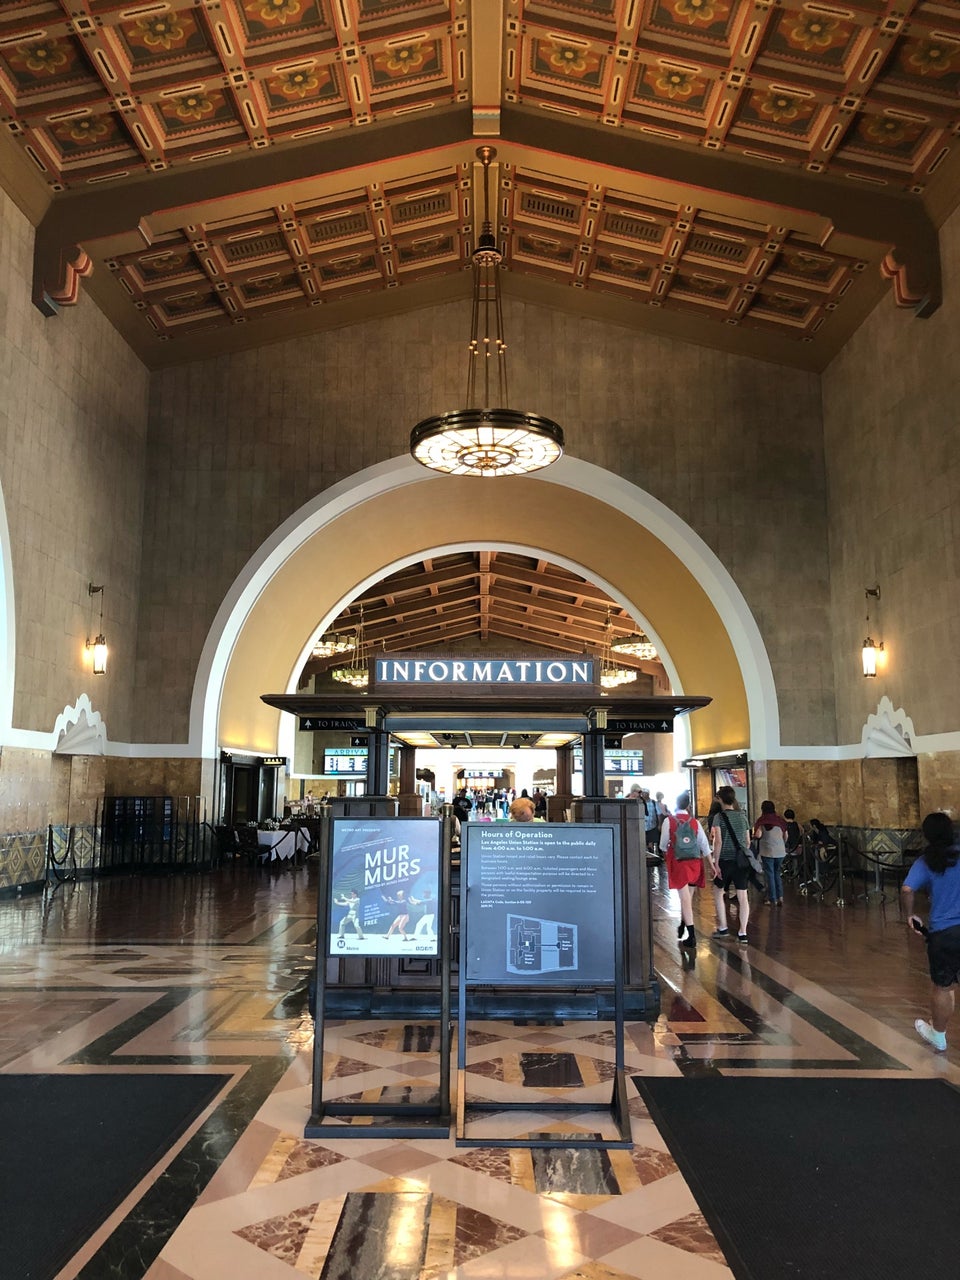 Union Station Wallpapers